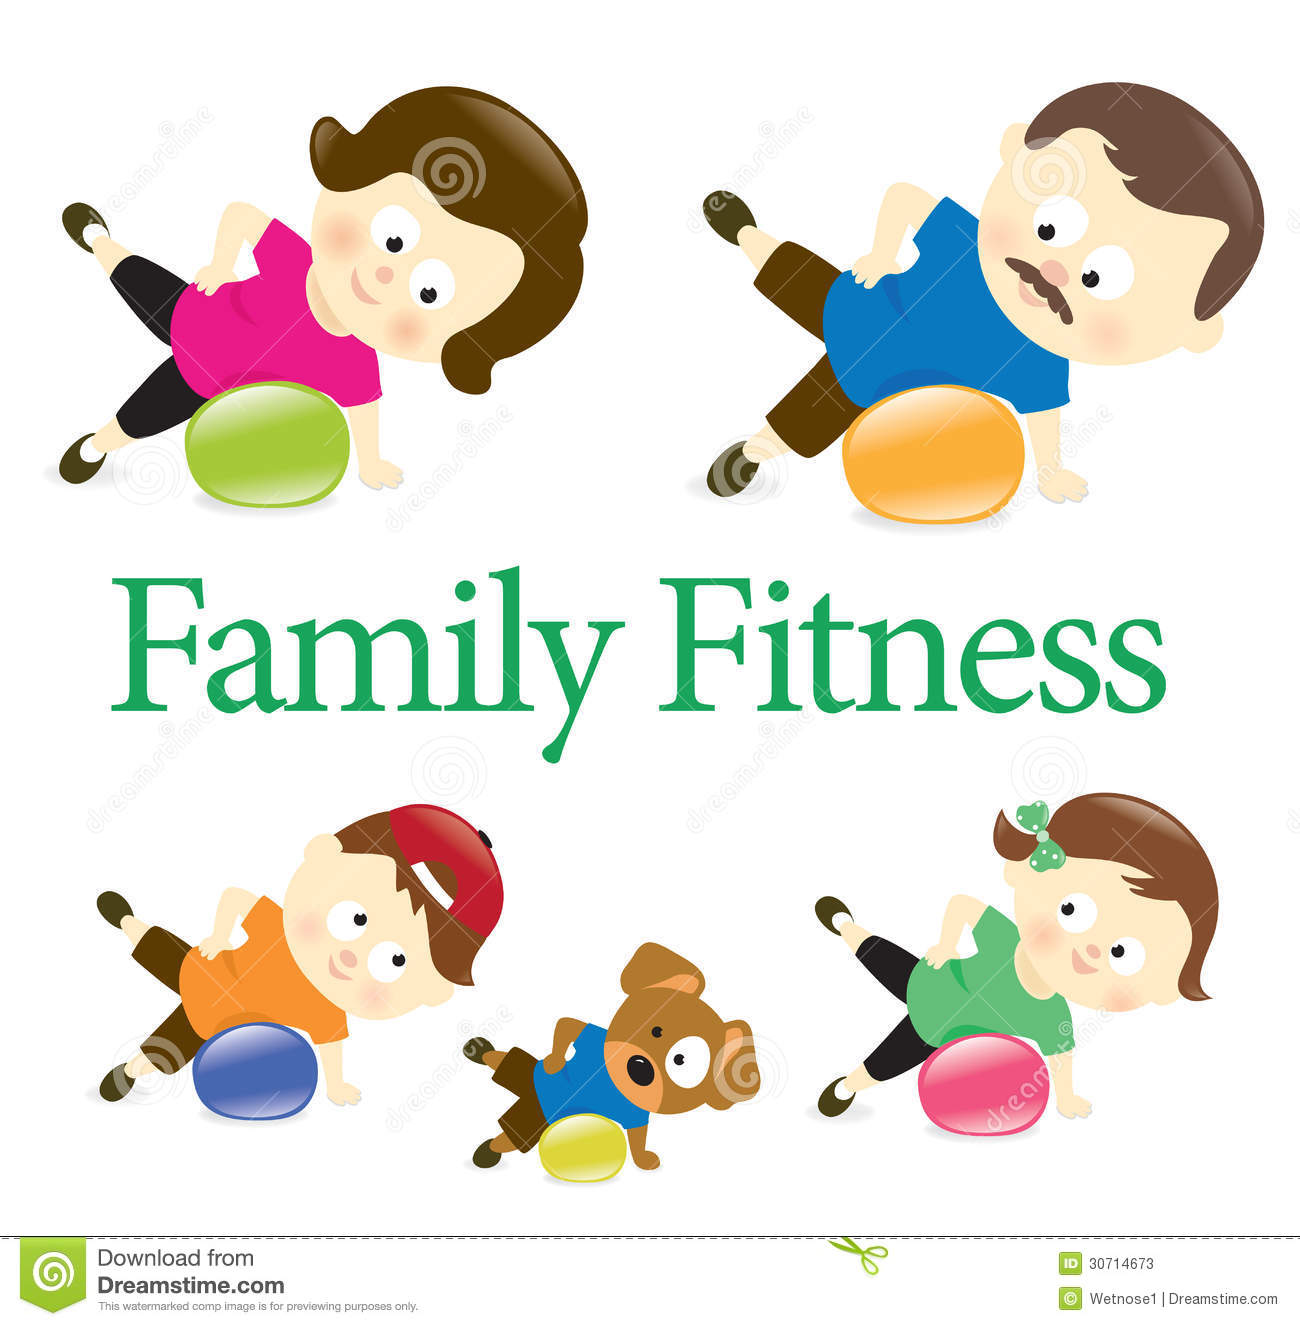 Family Fitness With Exercise Ball 2 Stock Photos   Image  30714673